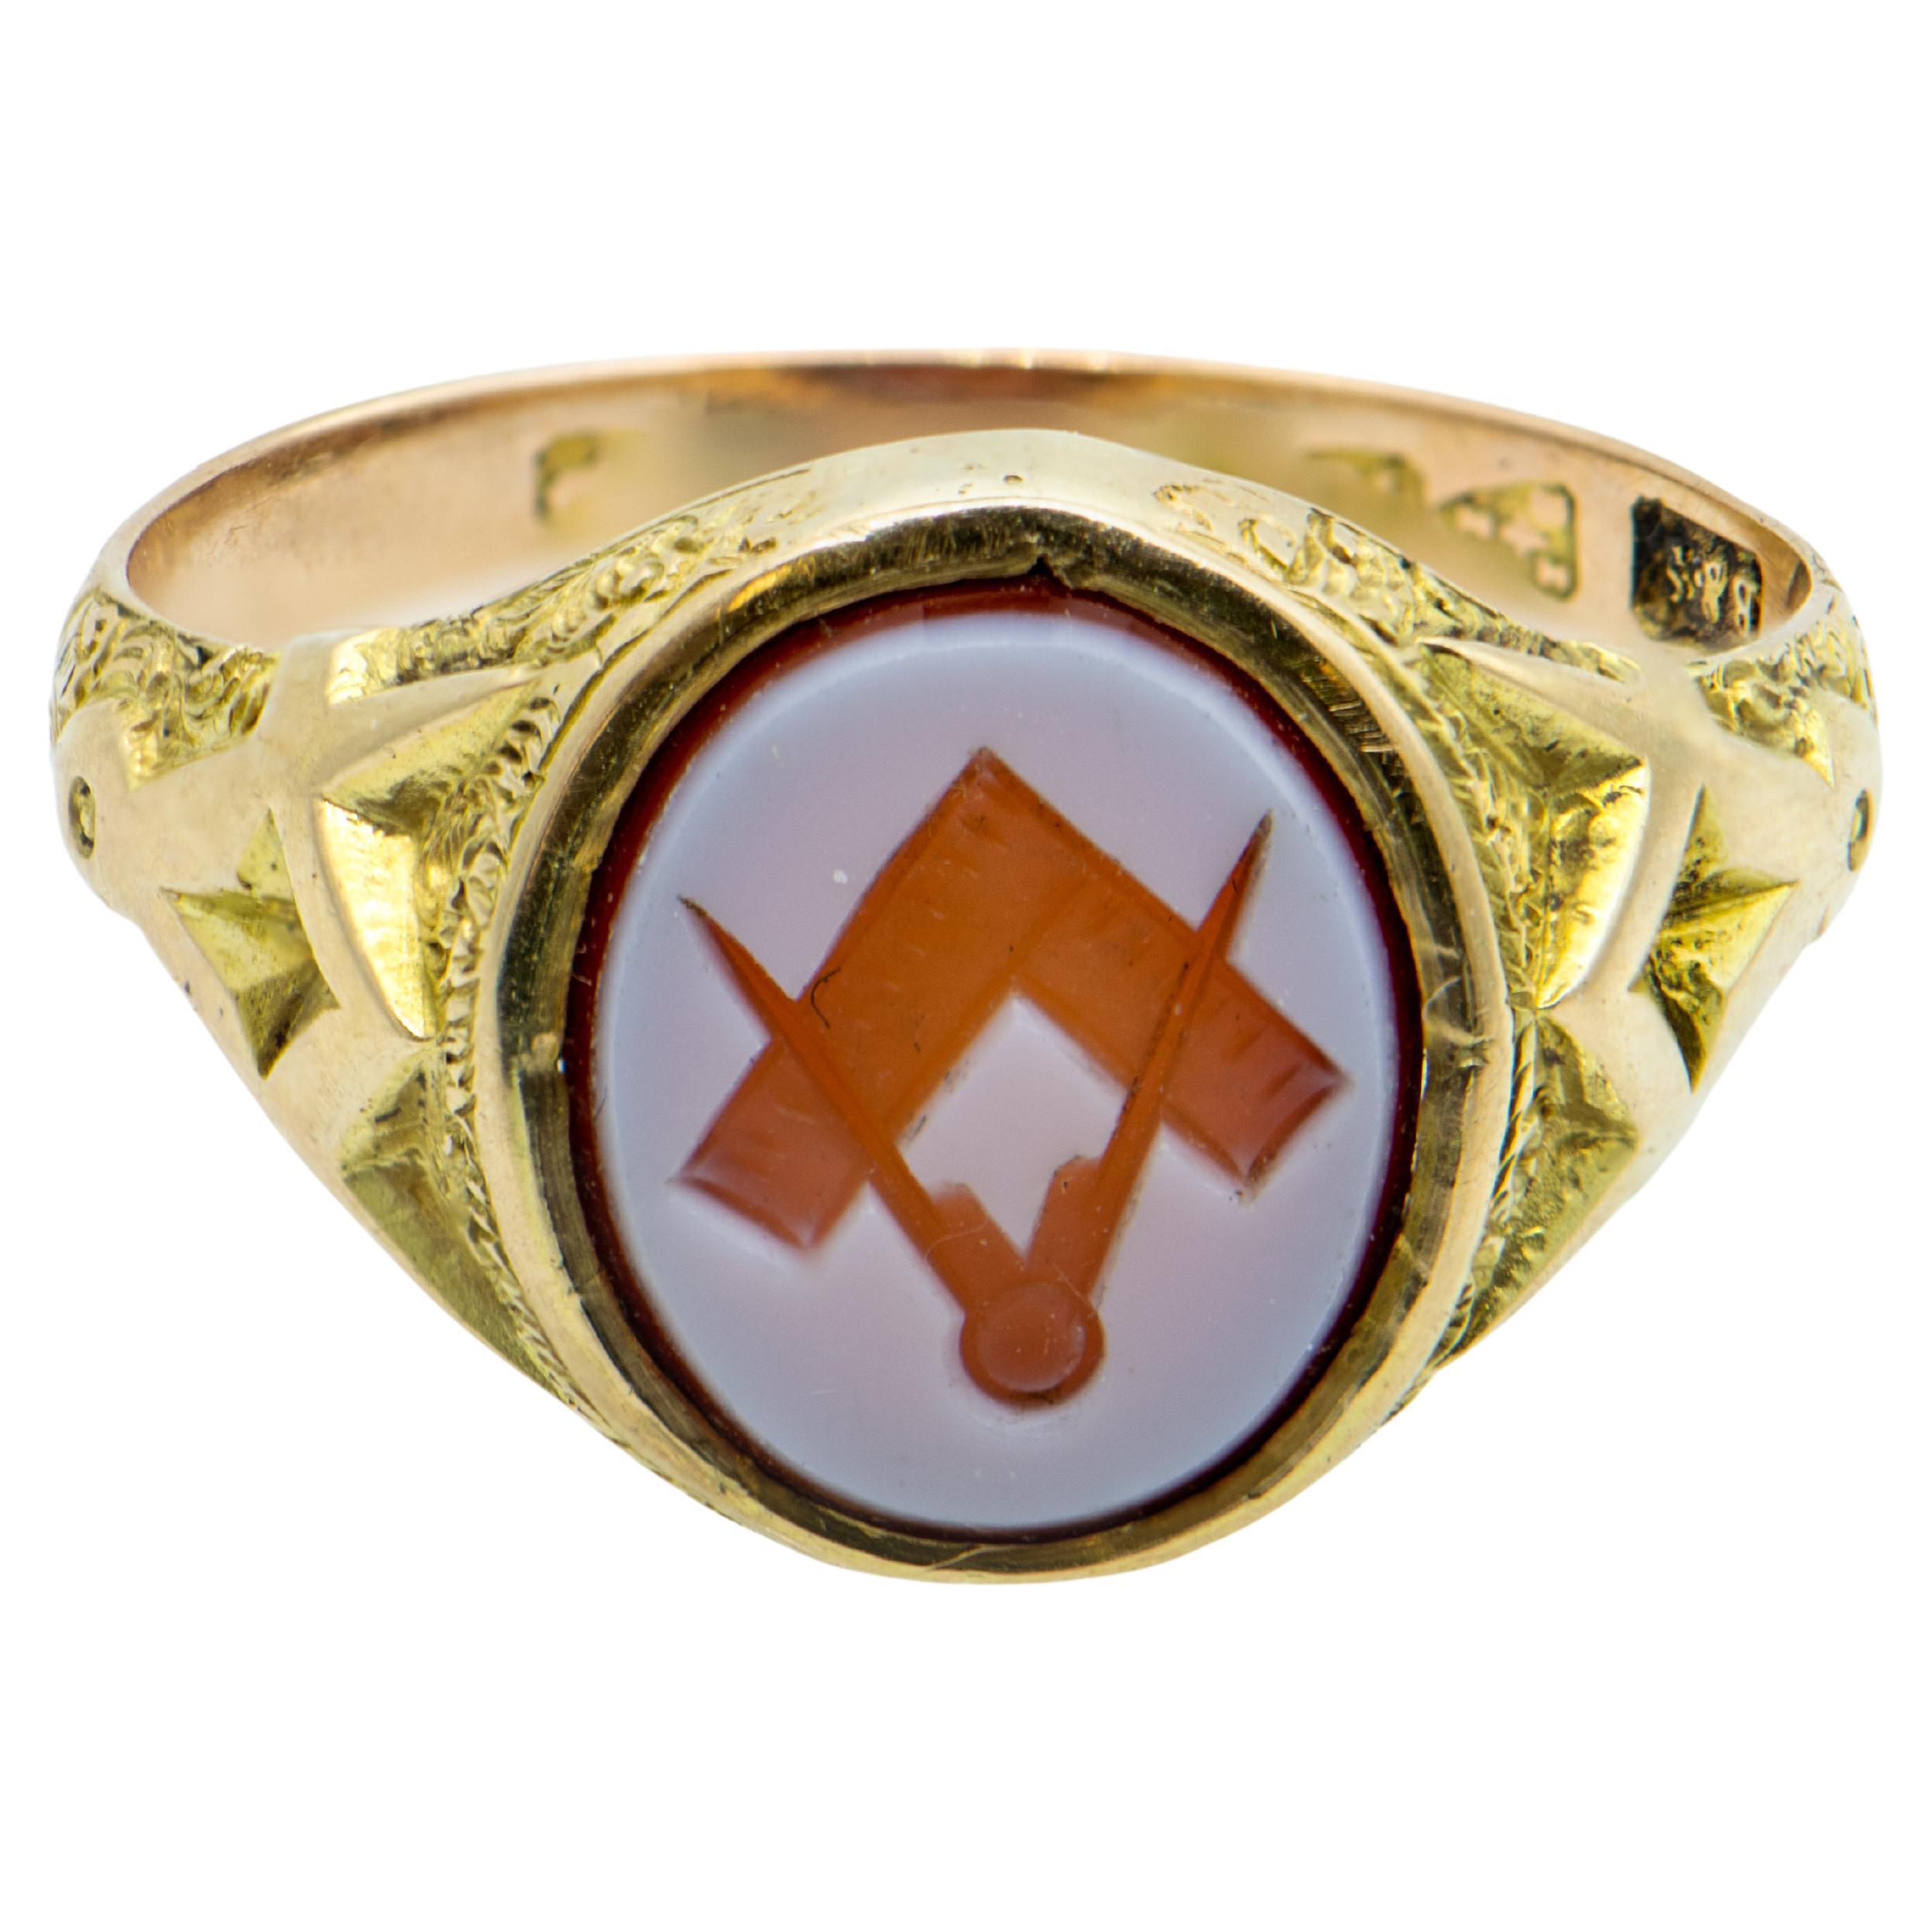 Victorian 15 Carat Yellow Gold Masonic Ring
Square and Compasses carved on Oval Sardonyx and
Gold Square and Compasses on the shoulders.
Oval stone dimensions: 11.5mm x 9.6mm .
Ring Size T (US 9 3/4)
Weight of the ring is 5.76 grams
Very Good